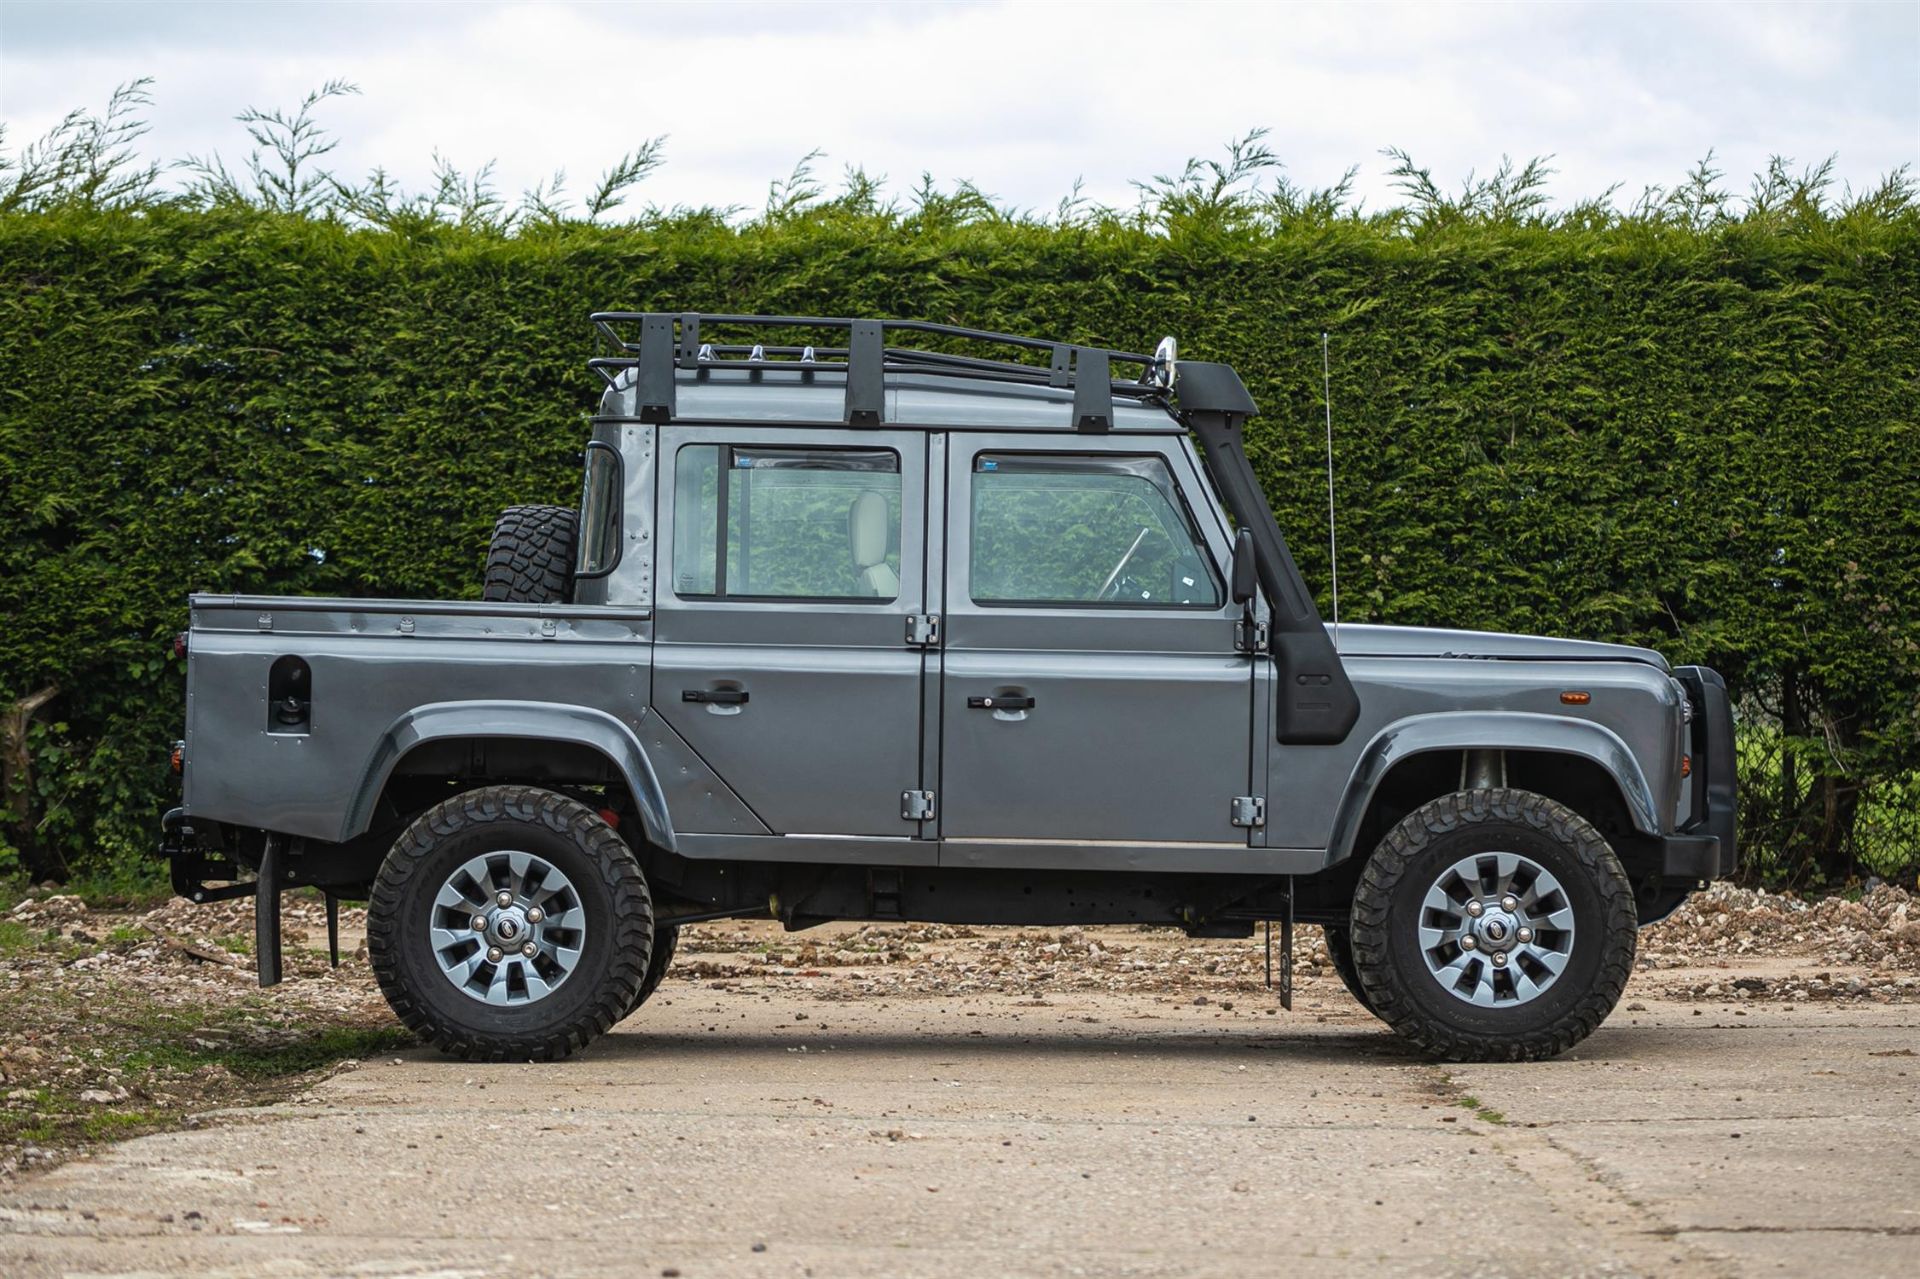 2002 Land Rover Defender 110 TD5 Double-Cab - Image 5 of 10